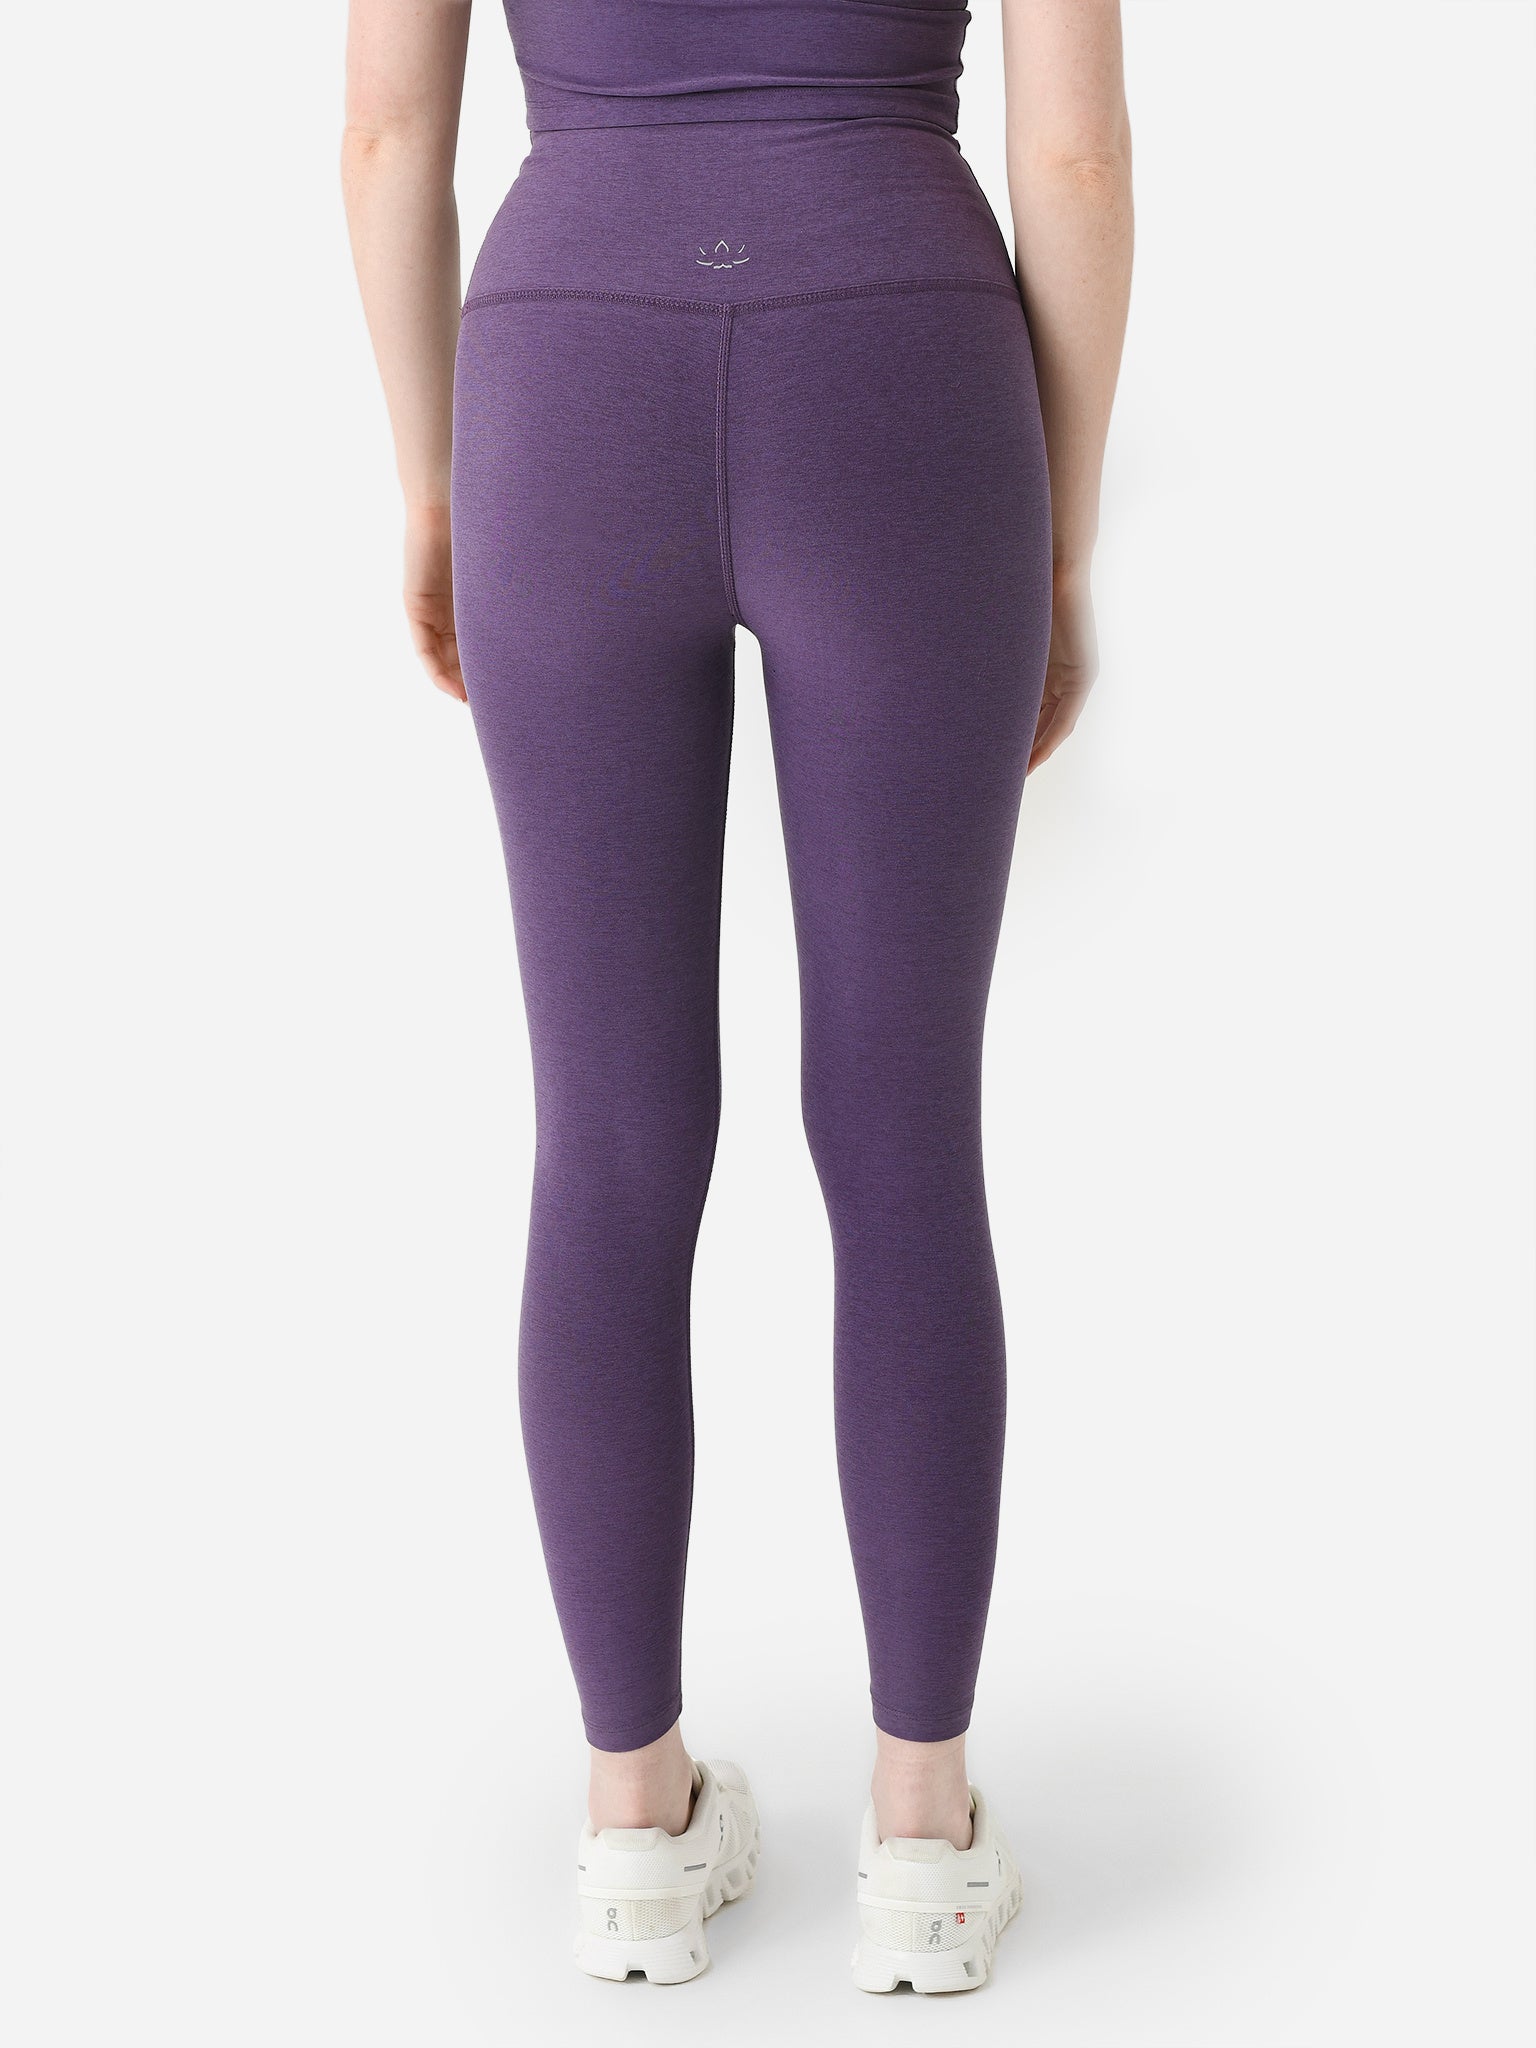 Beyond Yoga Spacedye Caught in the Midi - Ultra Violet Heather